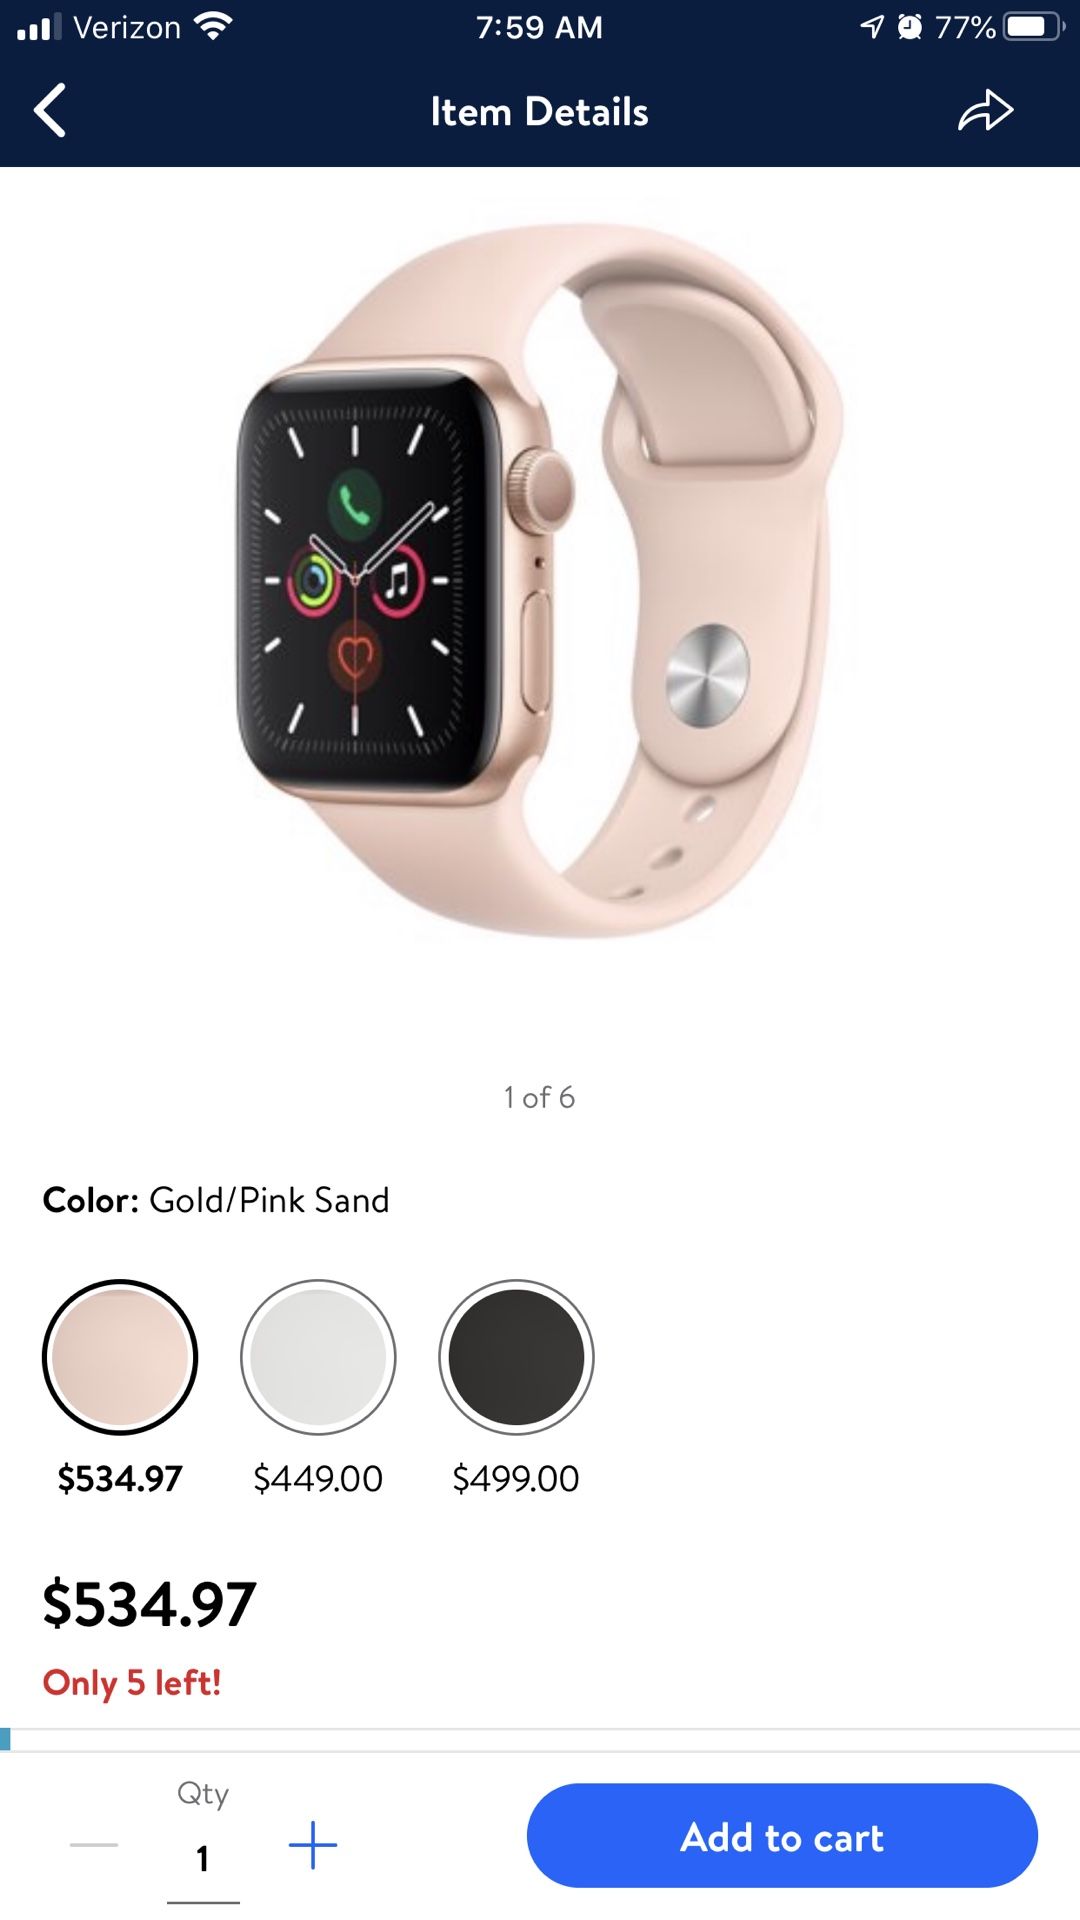 iWatch 5 Series 5 40mm Gold-Pink Sand Sport Band(New Sealed in box)- PRICE IS PER WATCH- FIRM PRICE